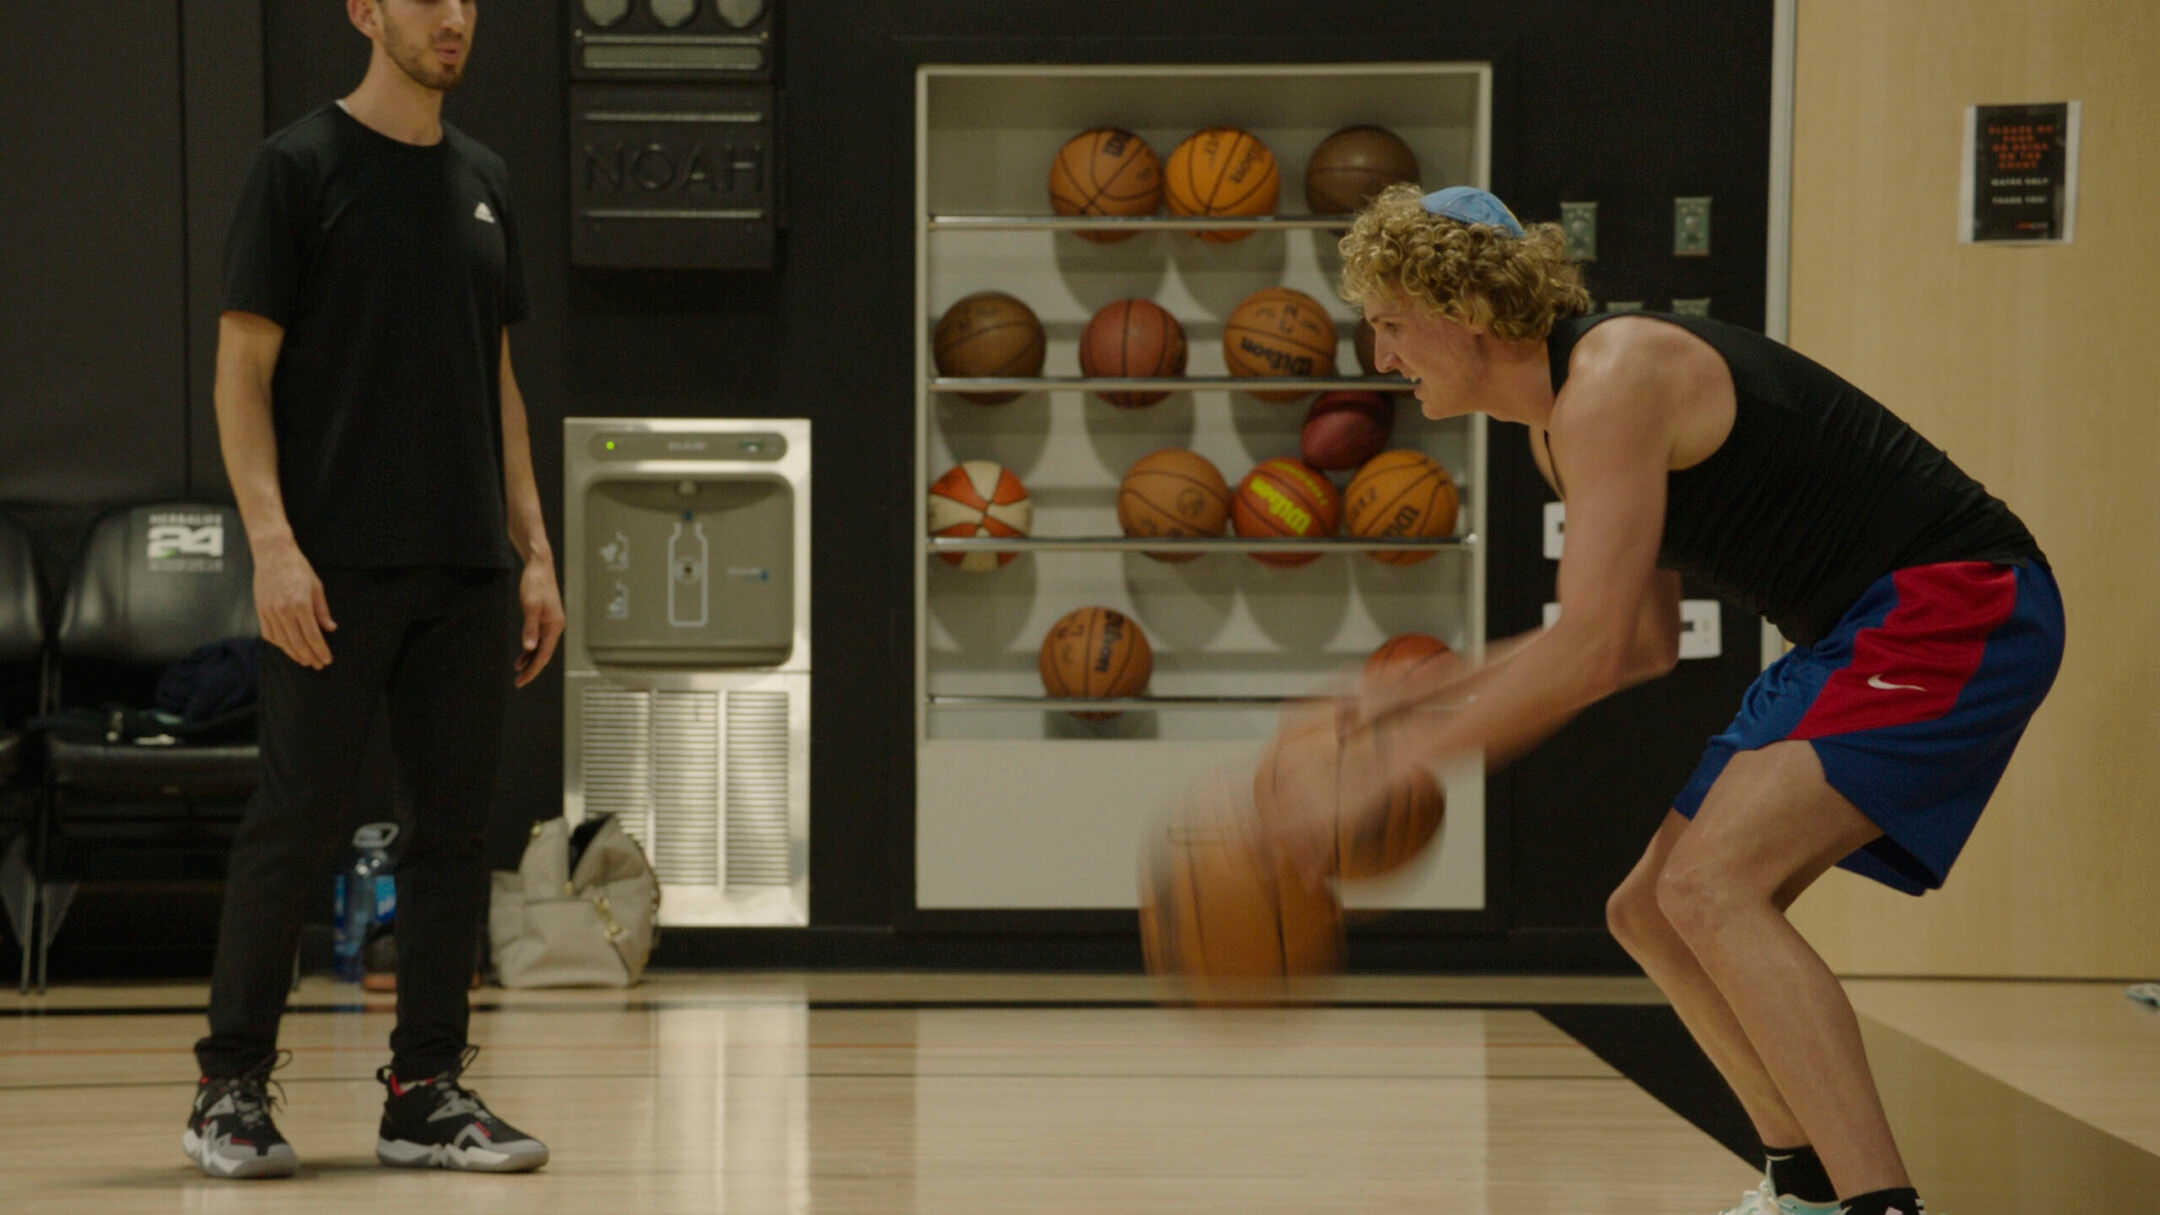 Ryan Turell, the Jewish basketball player who wears a kippah on the court, dribbles in a scene in “Destination NBA: A G League Odyssey.” (Courtesy of Prime Video)